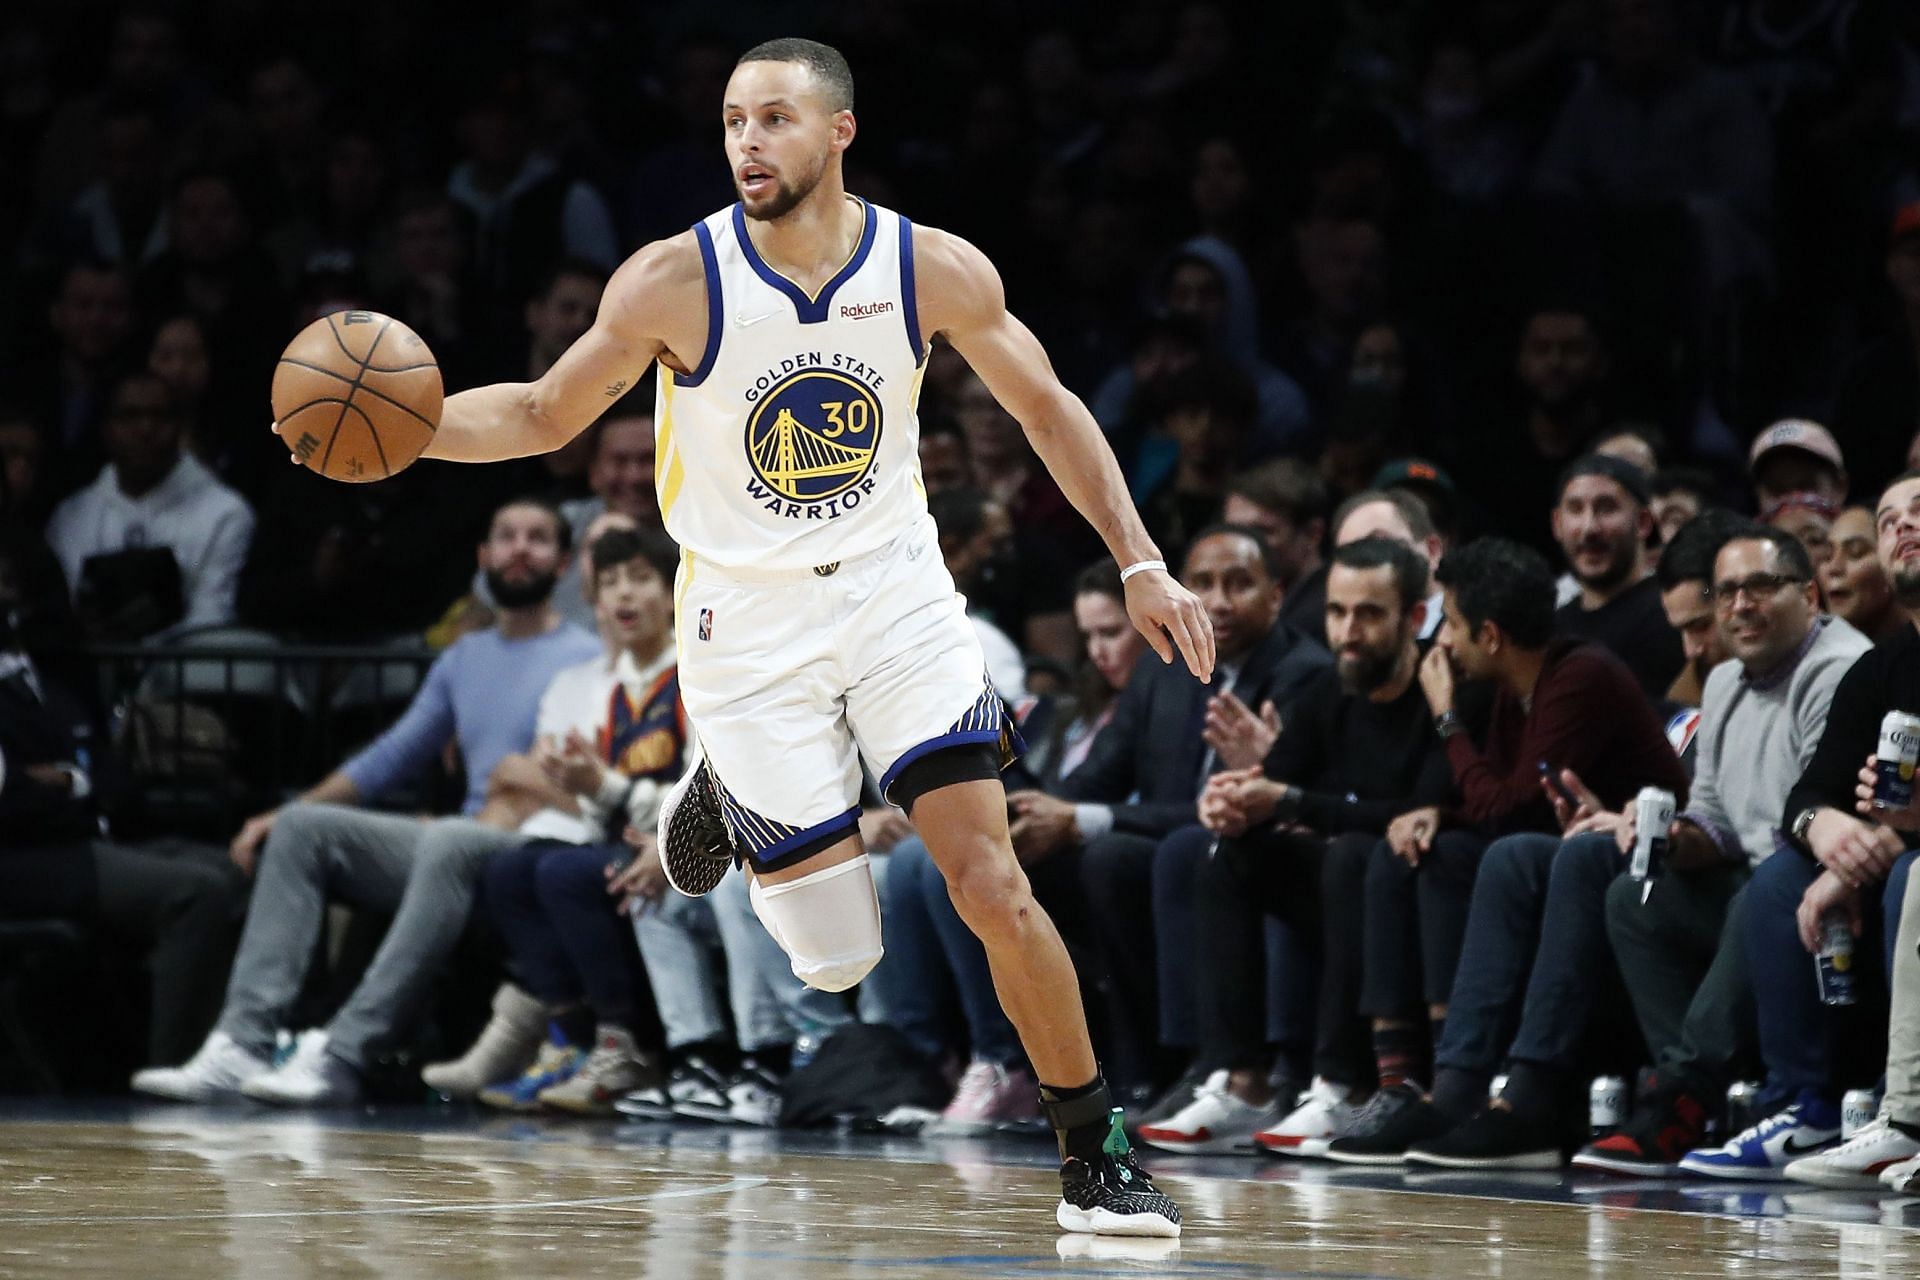 Stephen Curry exploded for 37 points as the Golden State Warriors beat the Brooklyn Nets 117-99